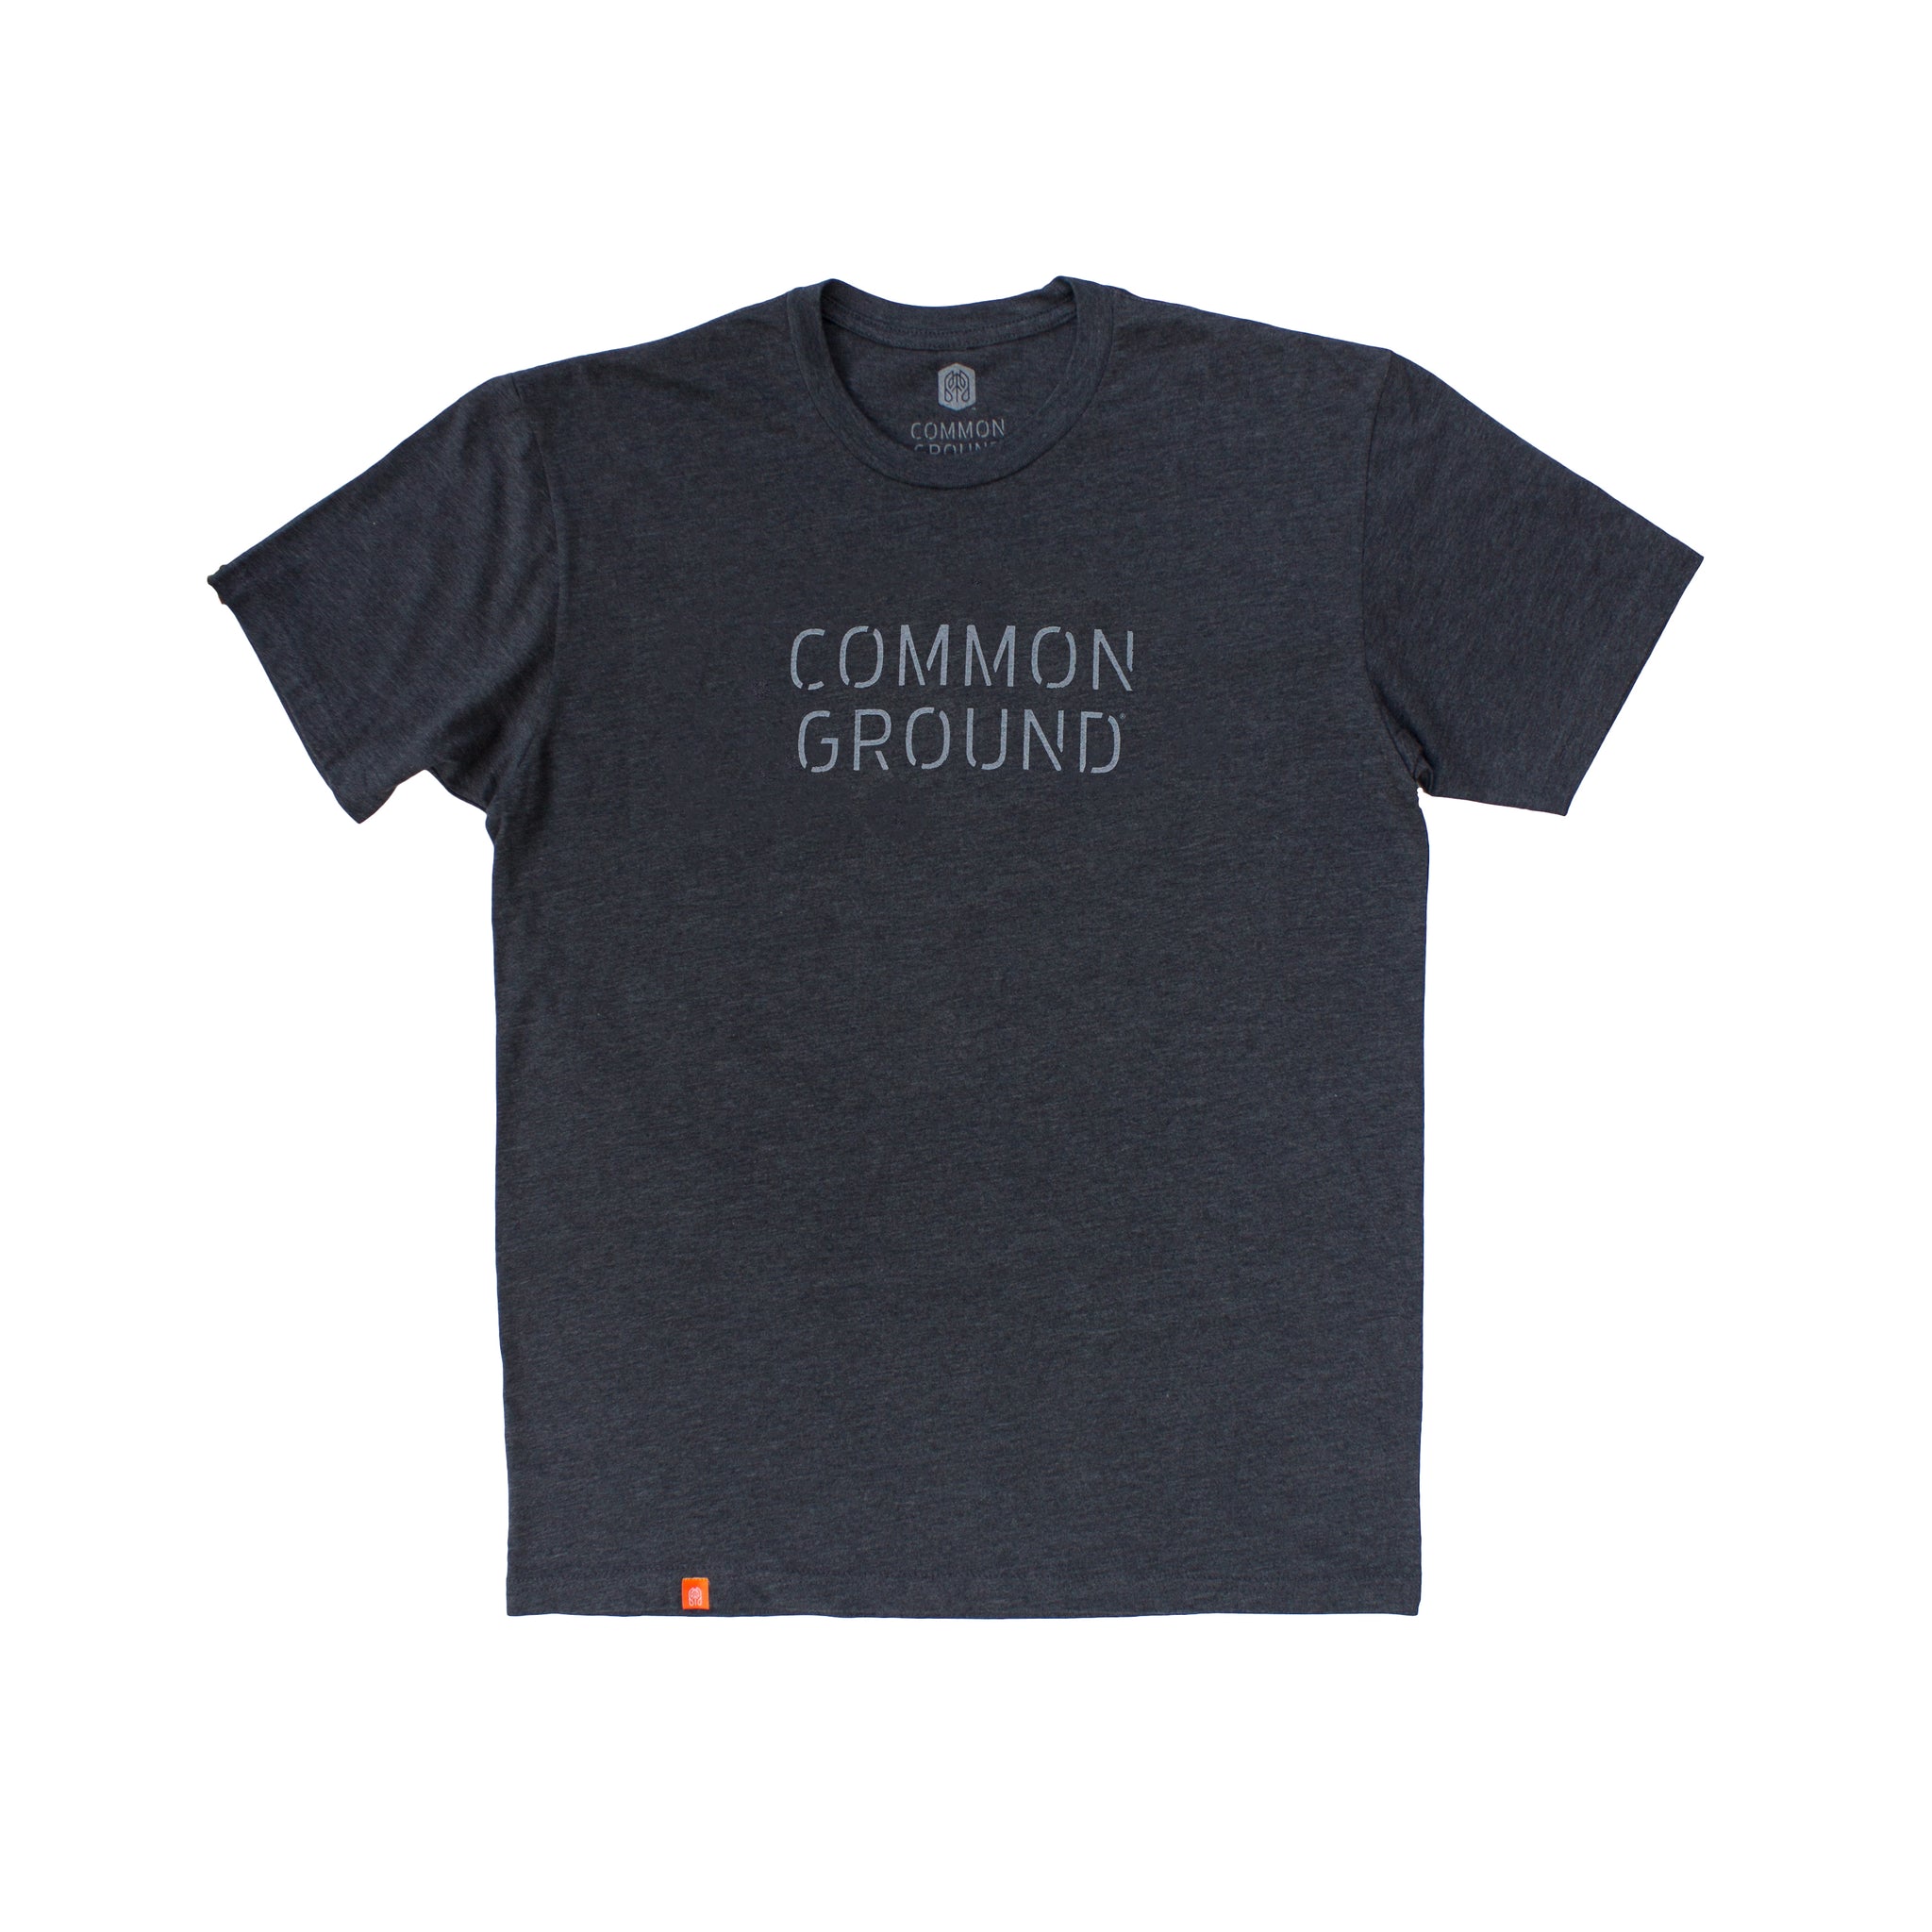 Charcoal - Common Ground T shirt Front View